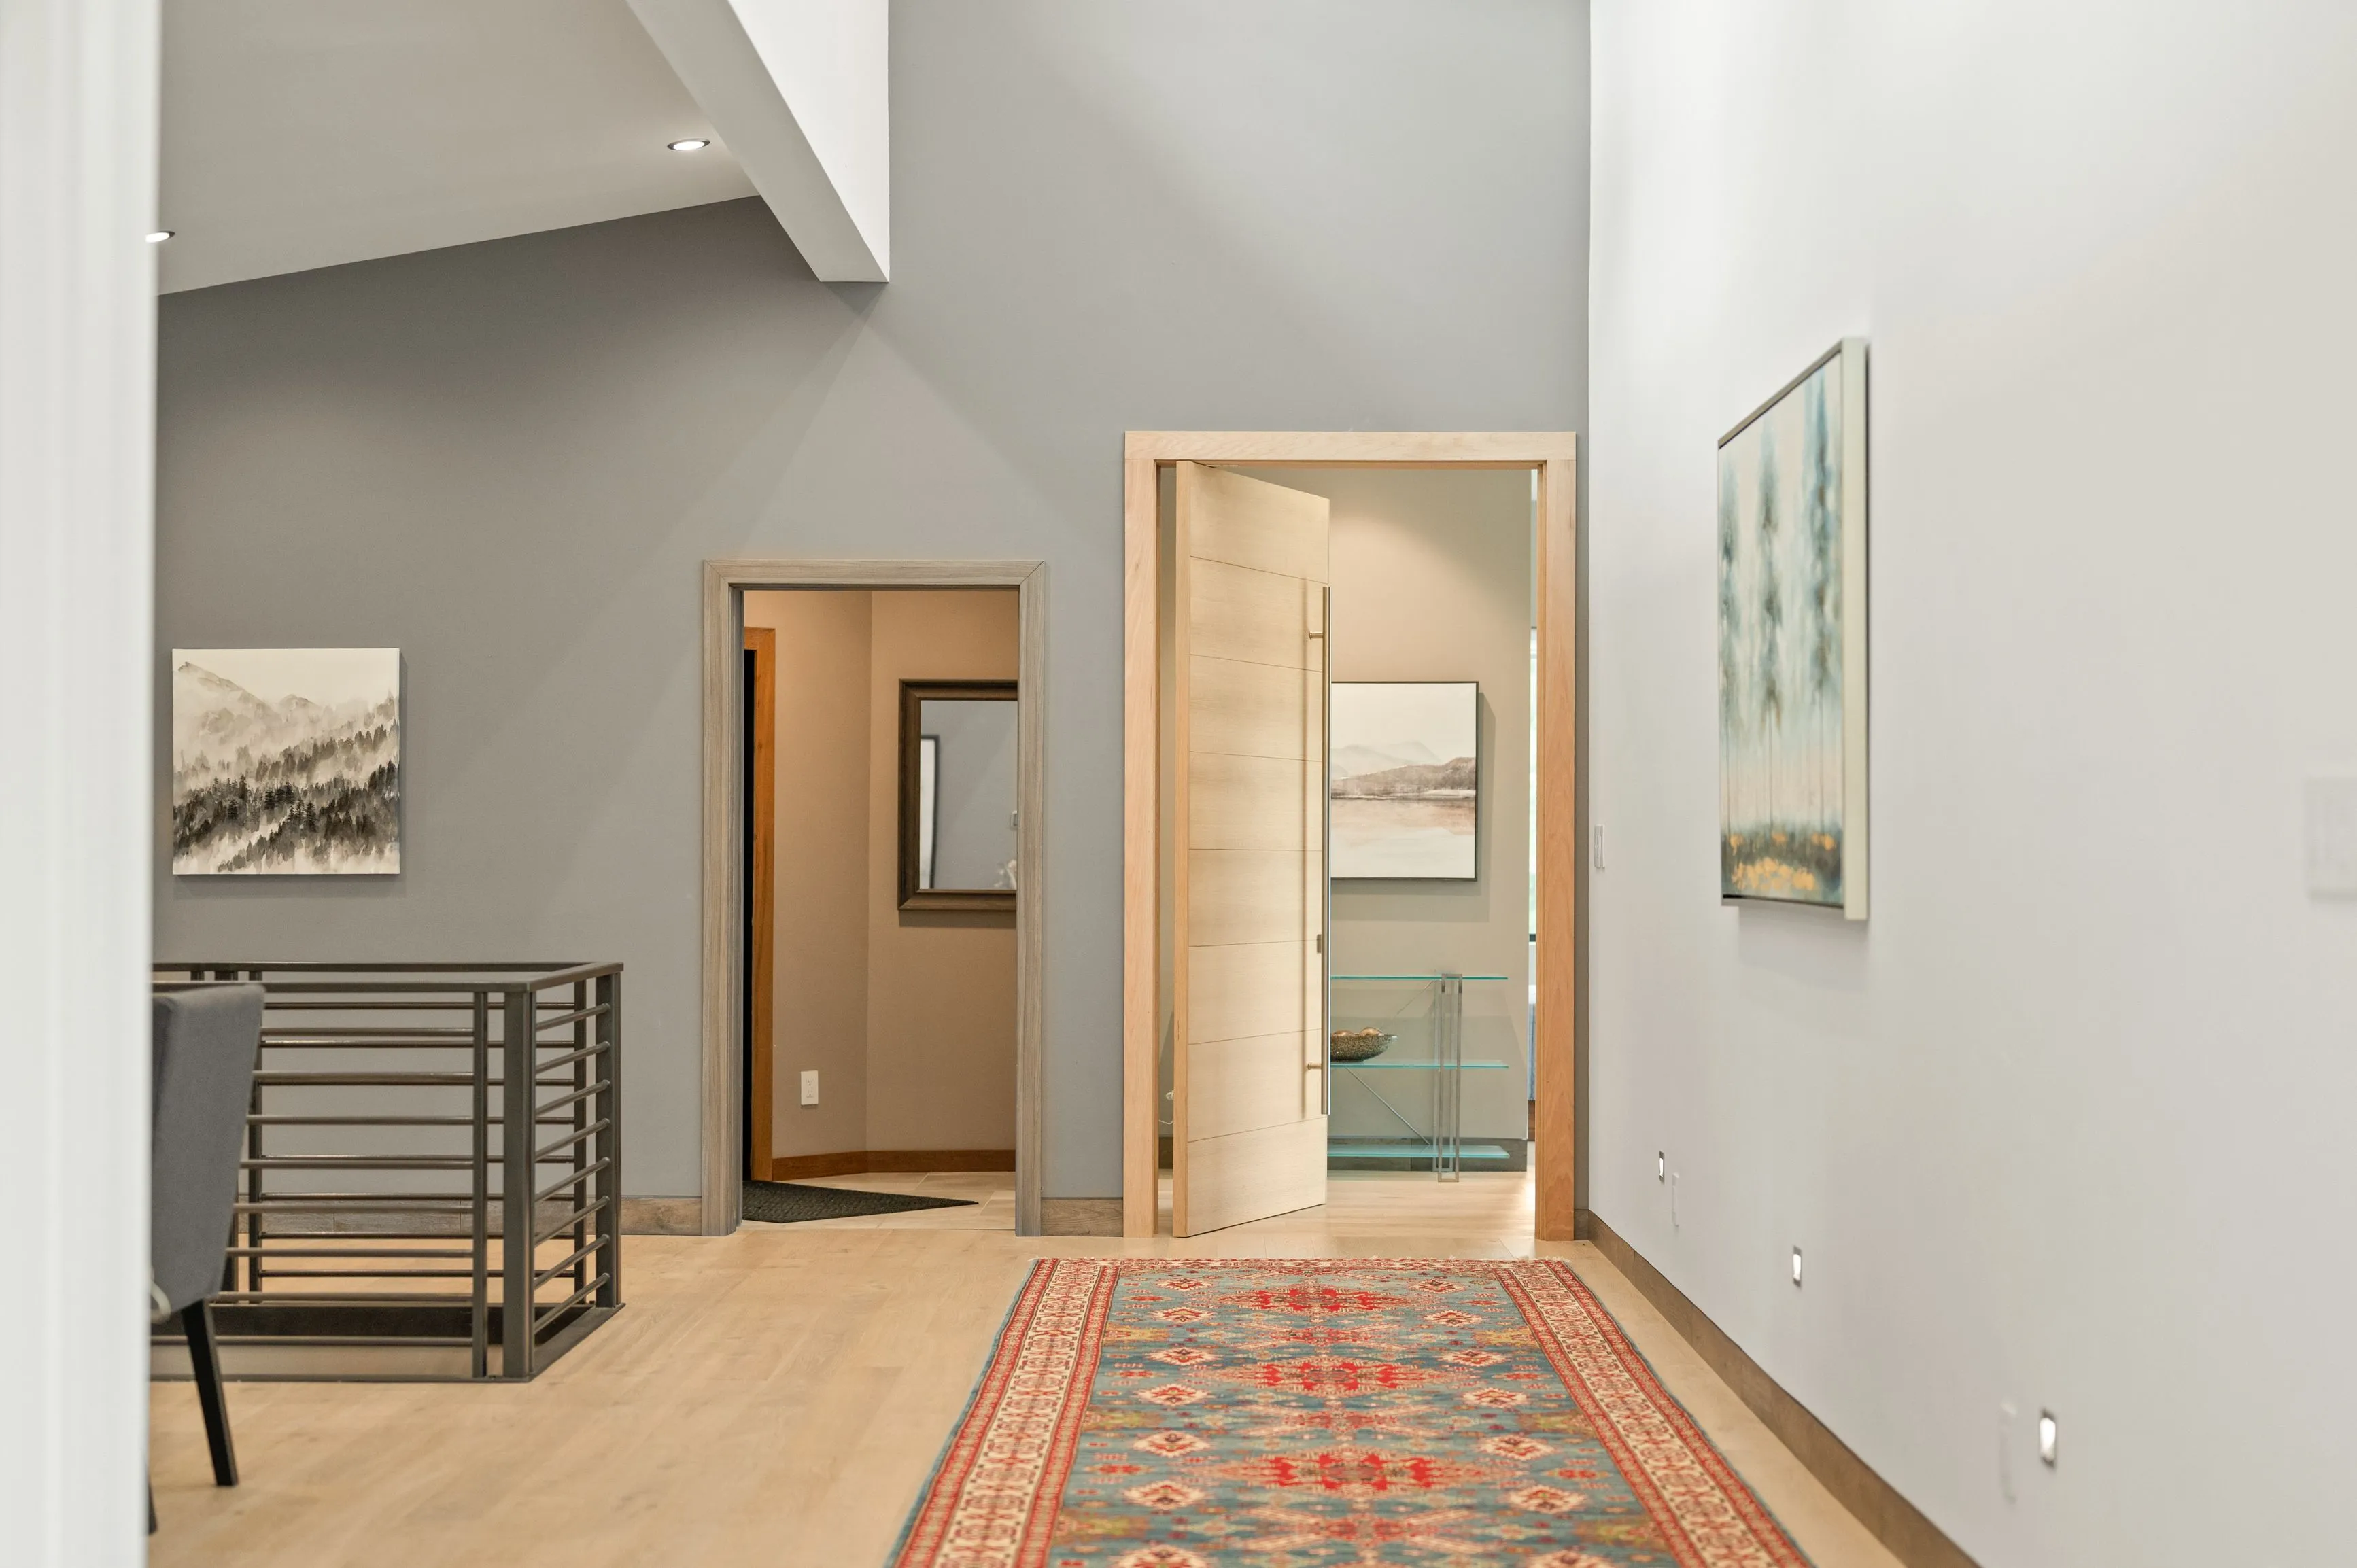 Modern home interior featuring a hallway with framed artwork on the walls, an oriental rug on the wooden floor, and open contemporary doors leading to adjacent rooms.